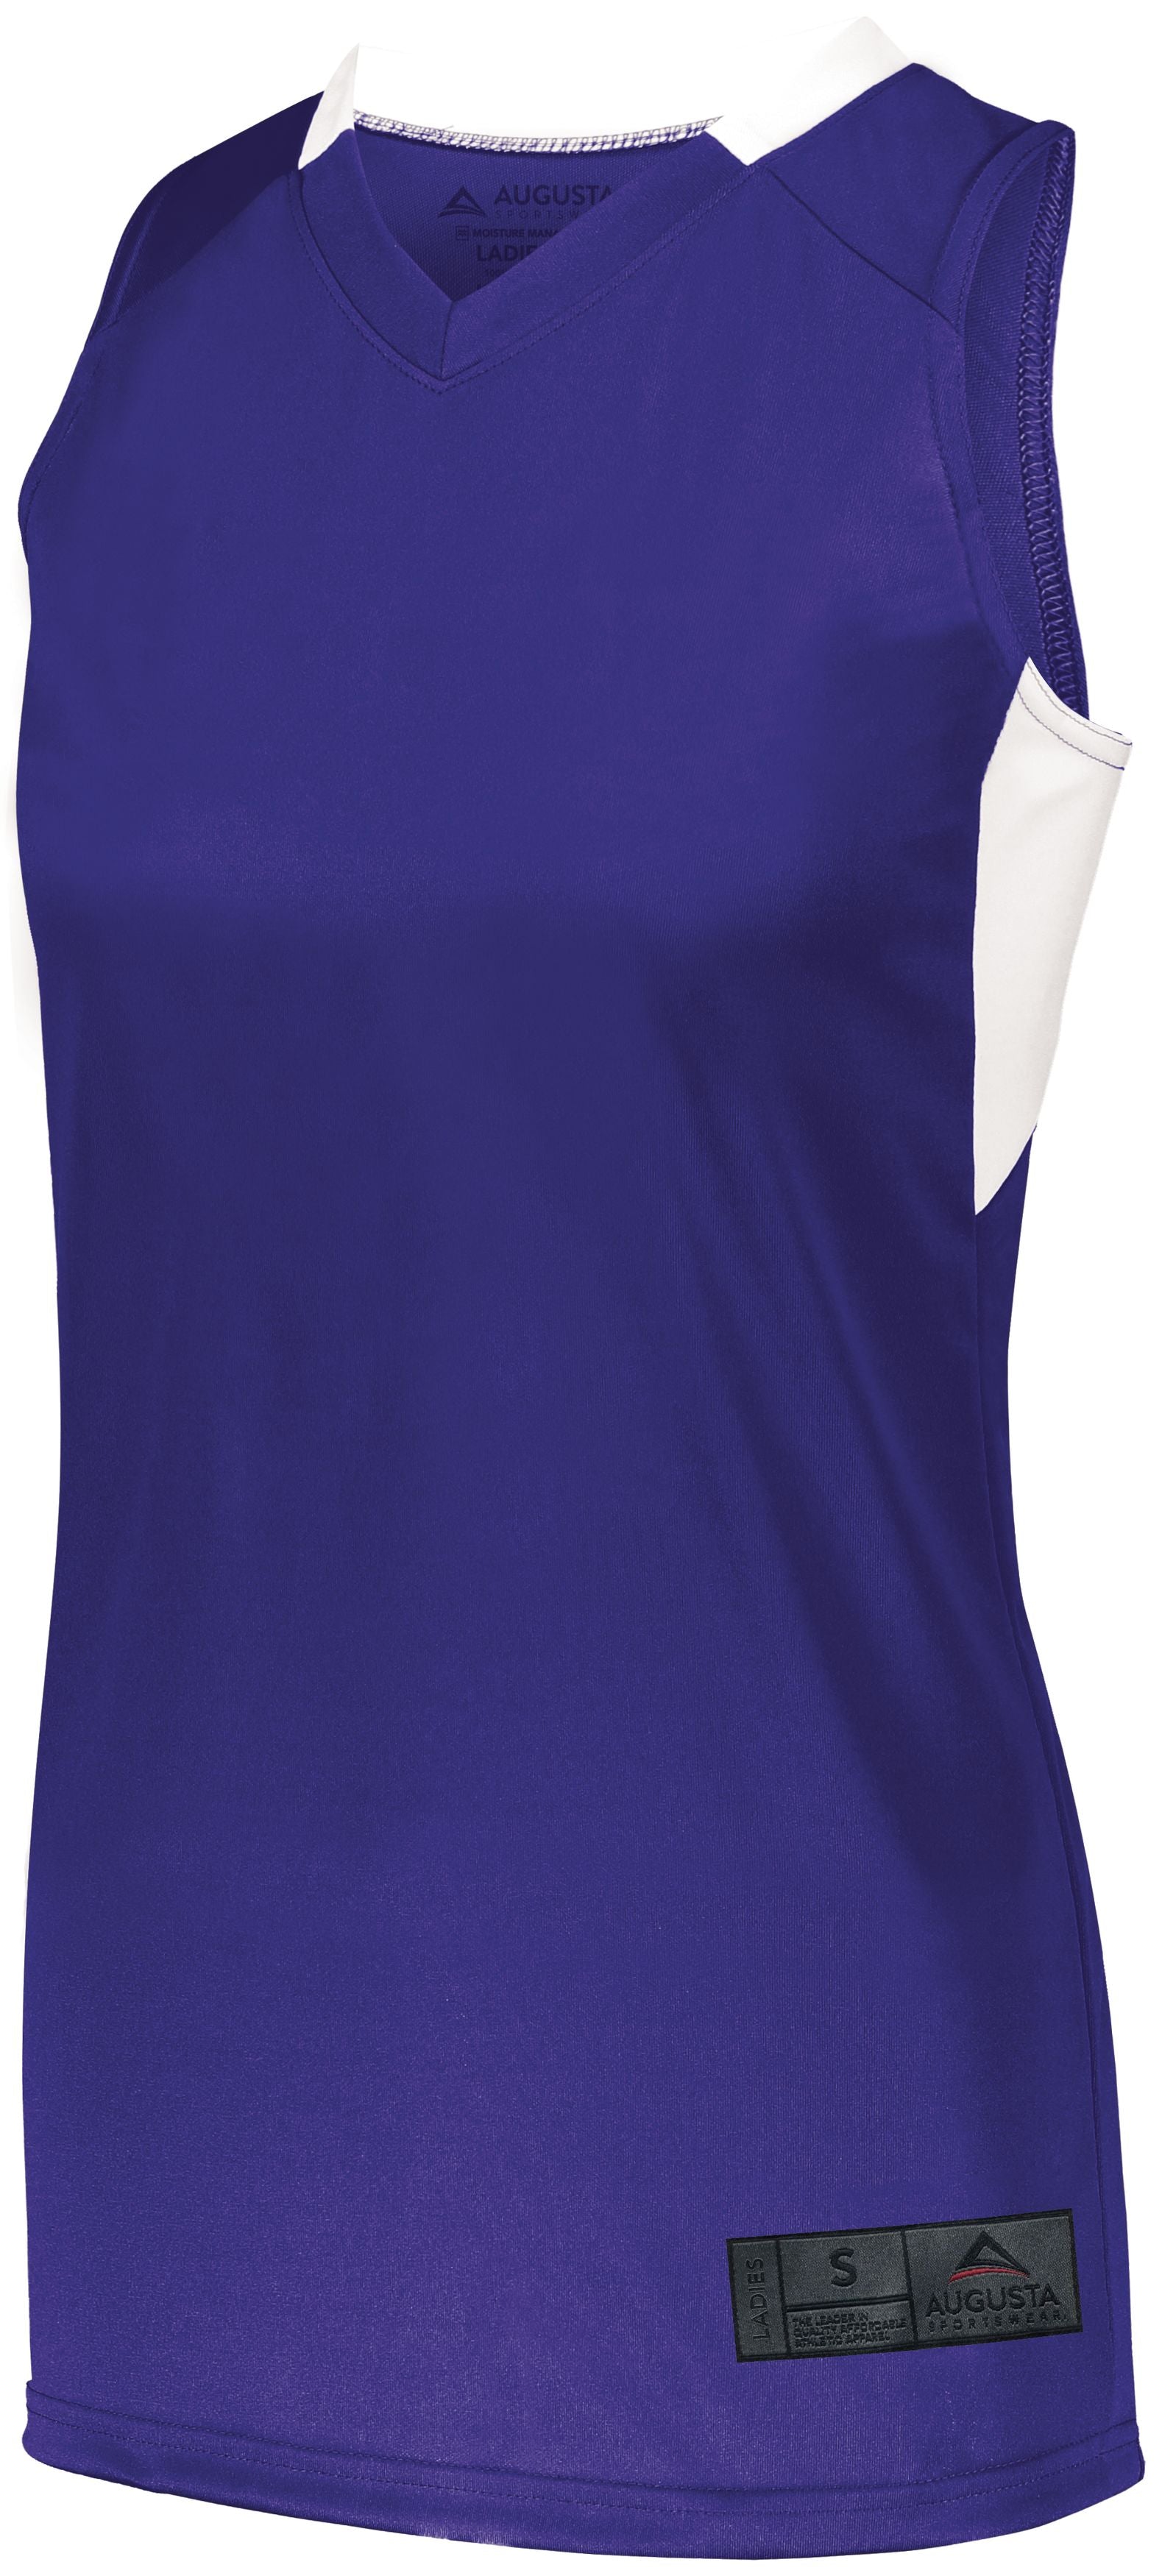 Augusta Sportswear Ladies Step-Back Basketball Jersey in Purple/White  -Part of the Ladies, Ladies-Jersey, Augusta-Products, Basketball, Shirts, All-Sports, All-Sports-1 product lines at KanaleyCreations.com